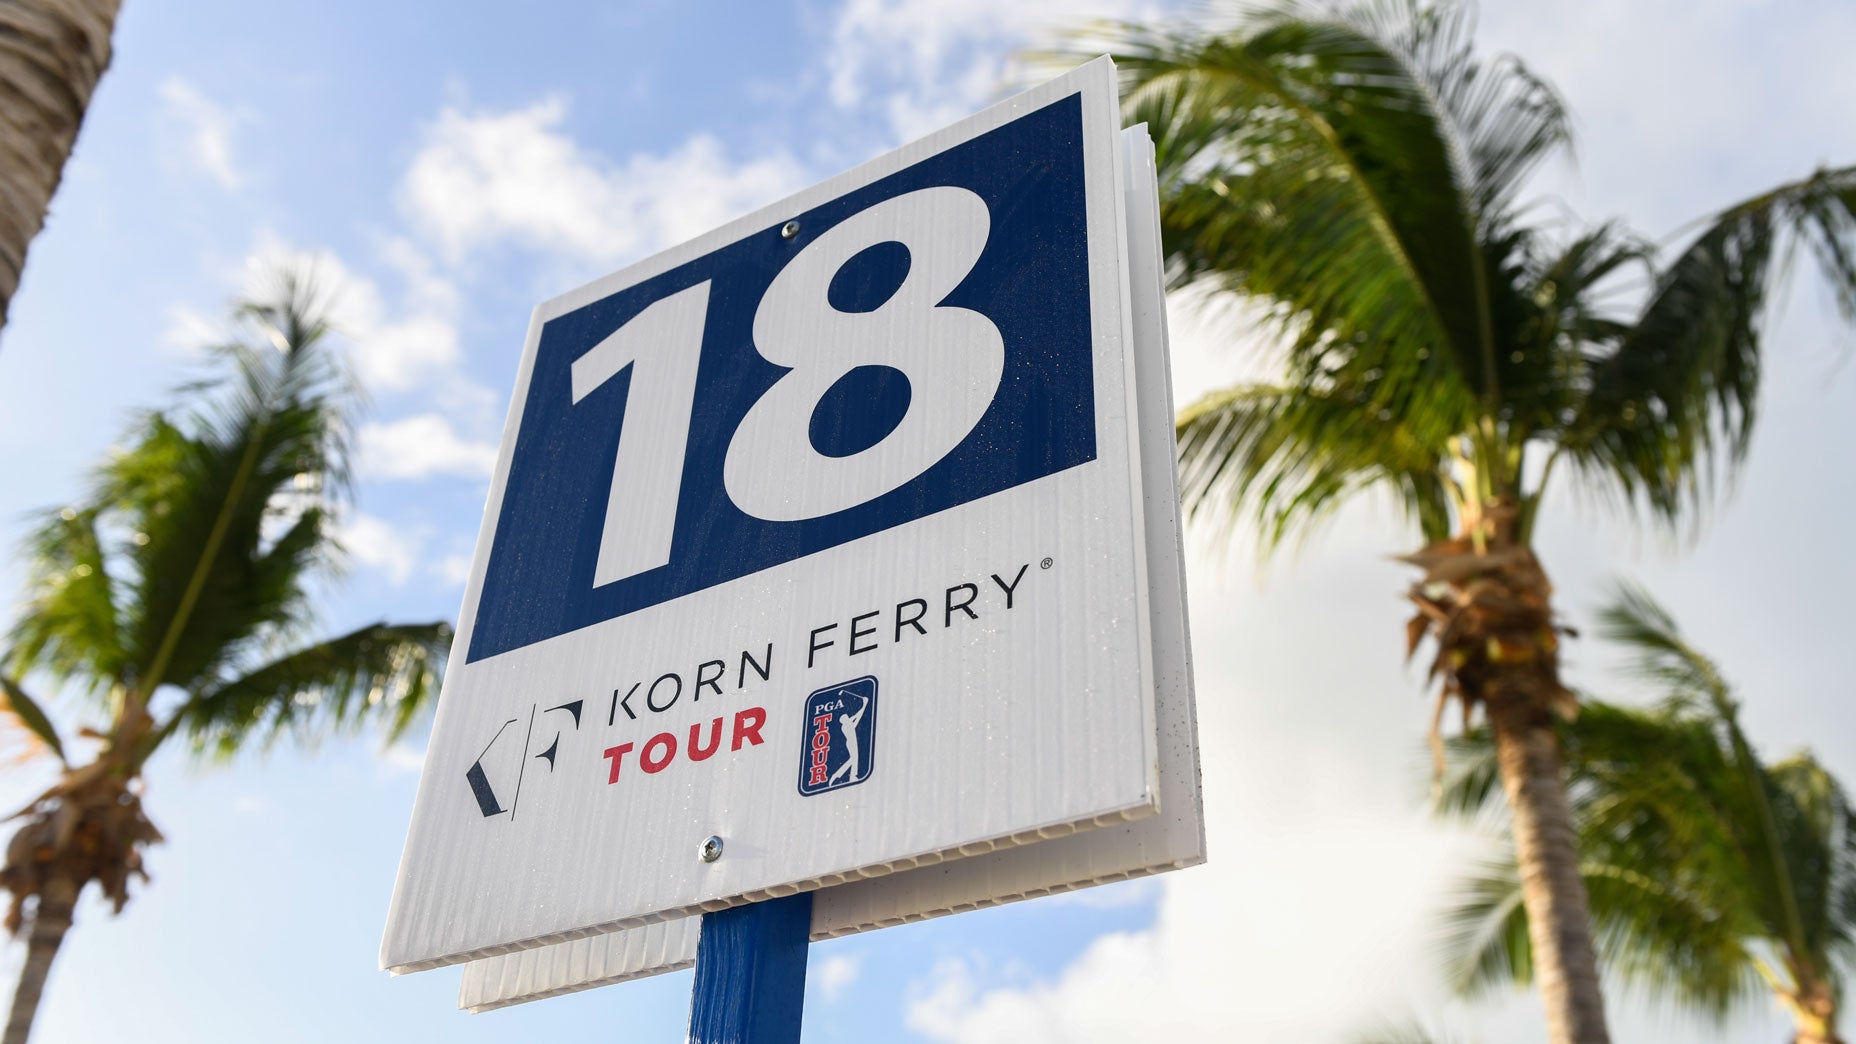 Korn Ferry Tour announces revised 2020 schedule, additional events